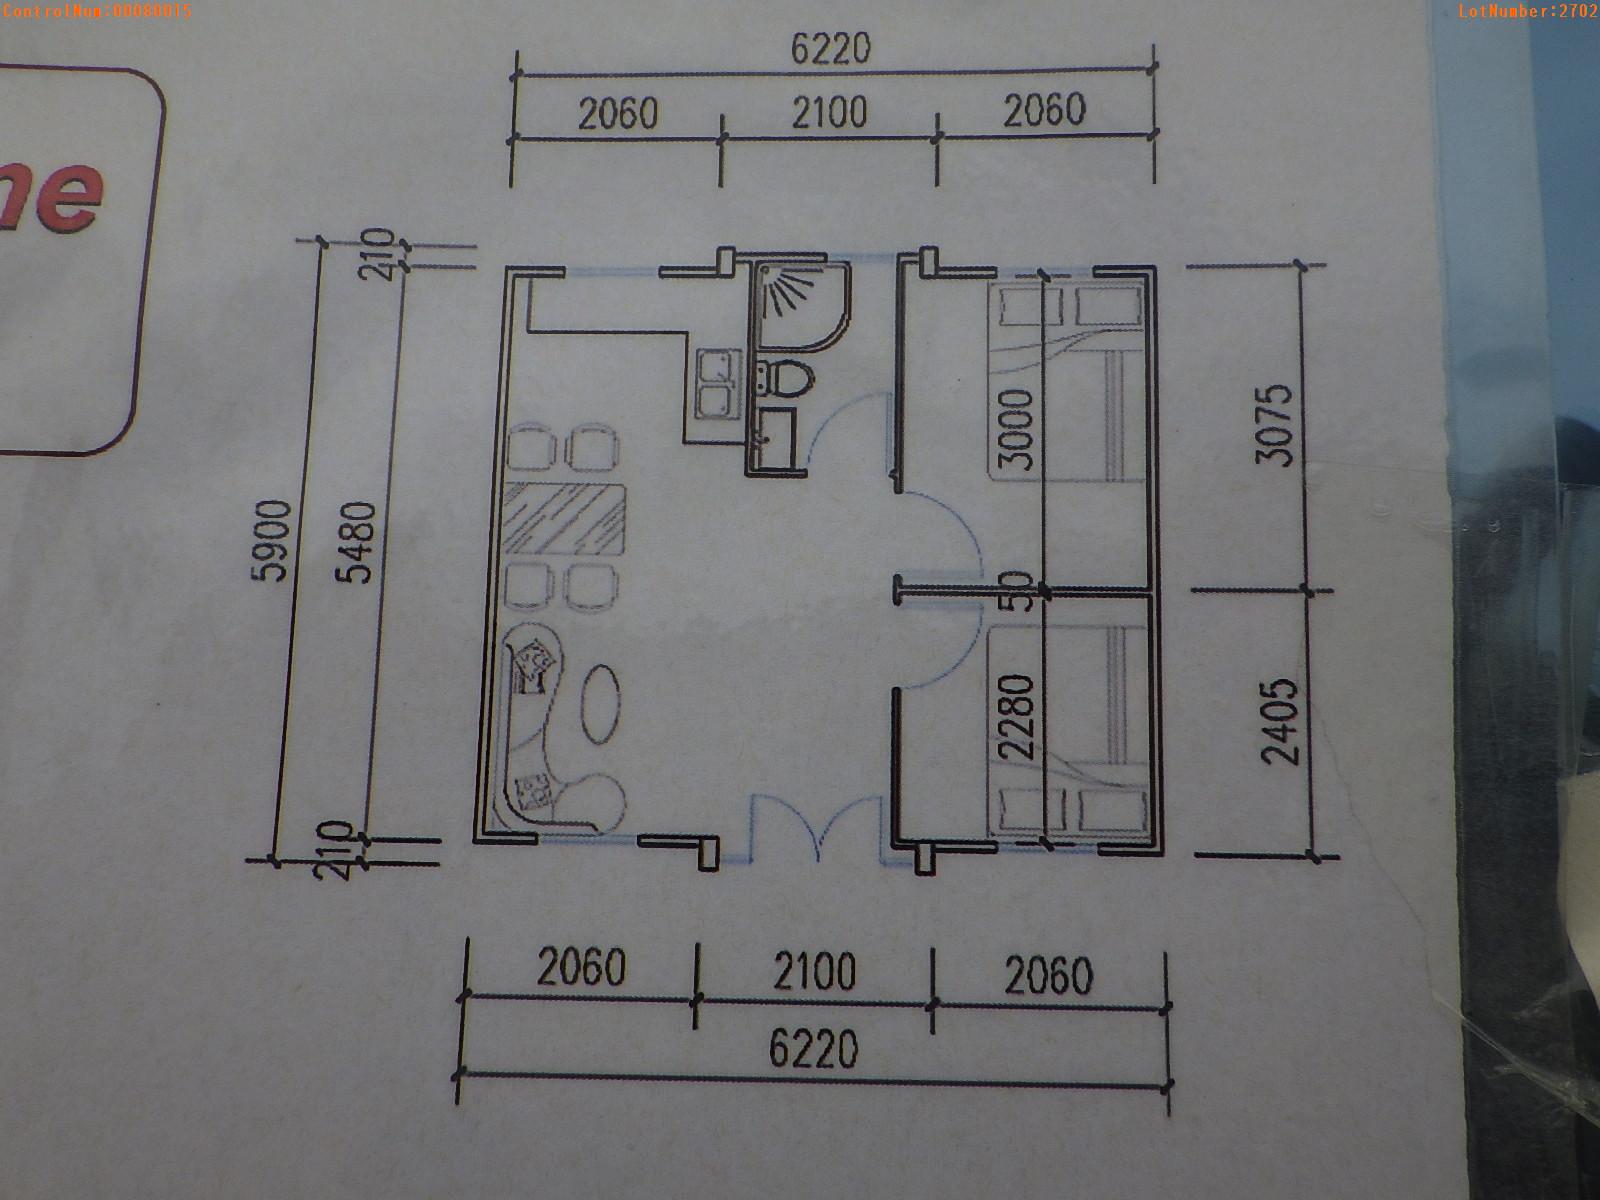 5-02702 (Equip.-Storage building)  Seller:Private/Dealer MOBE M02S TWO BEDROOM F